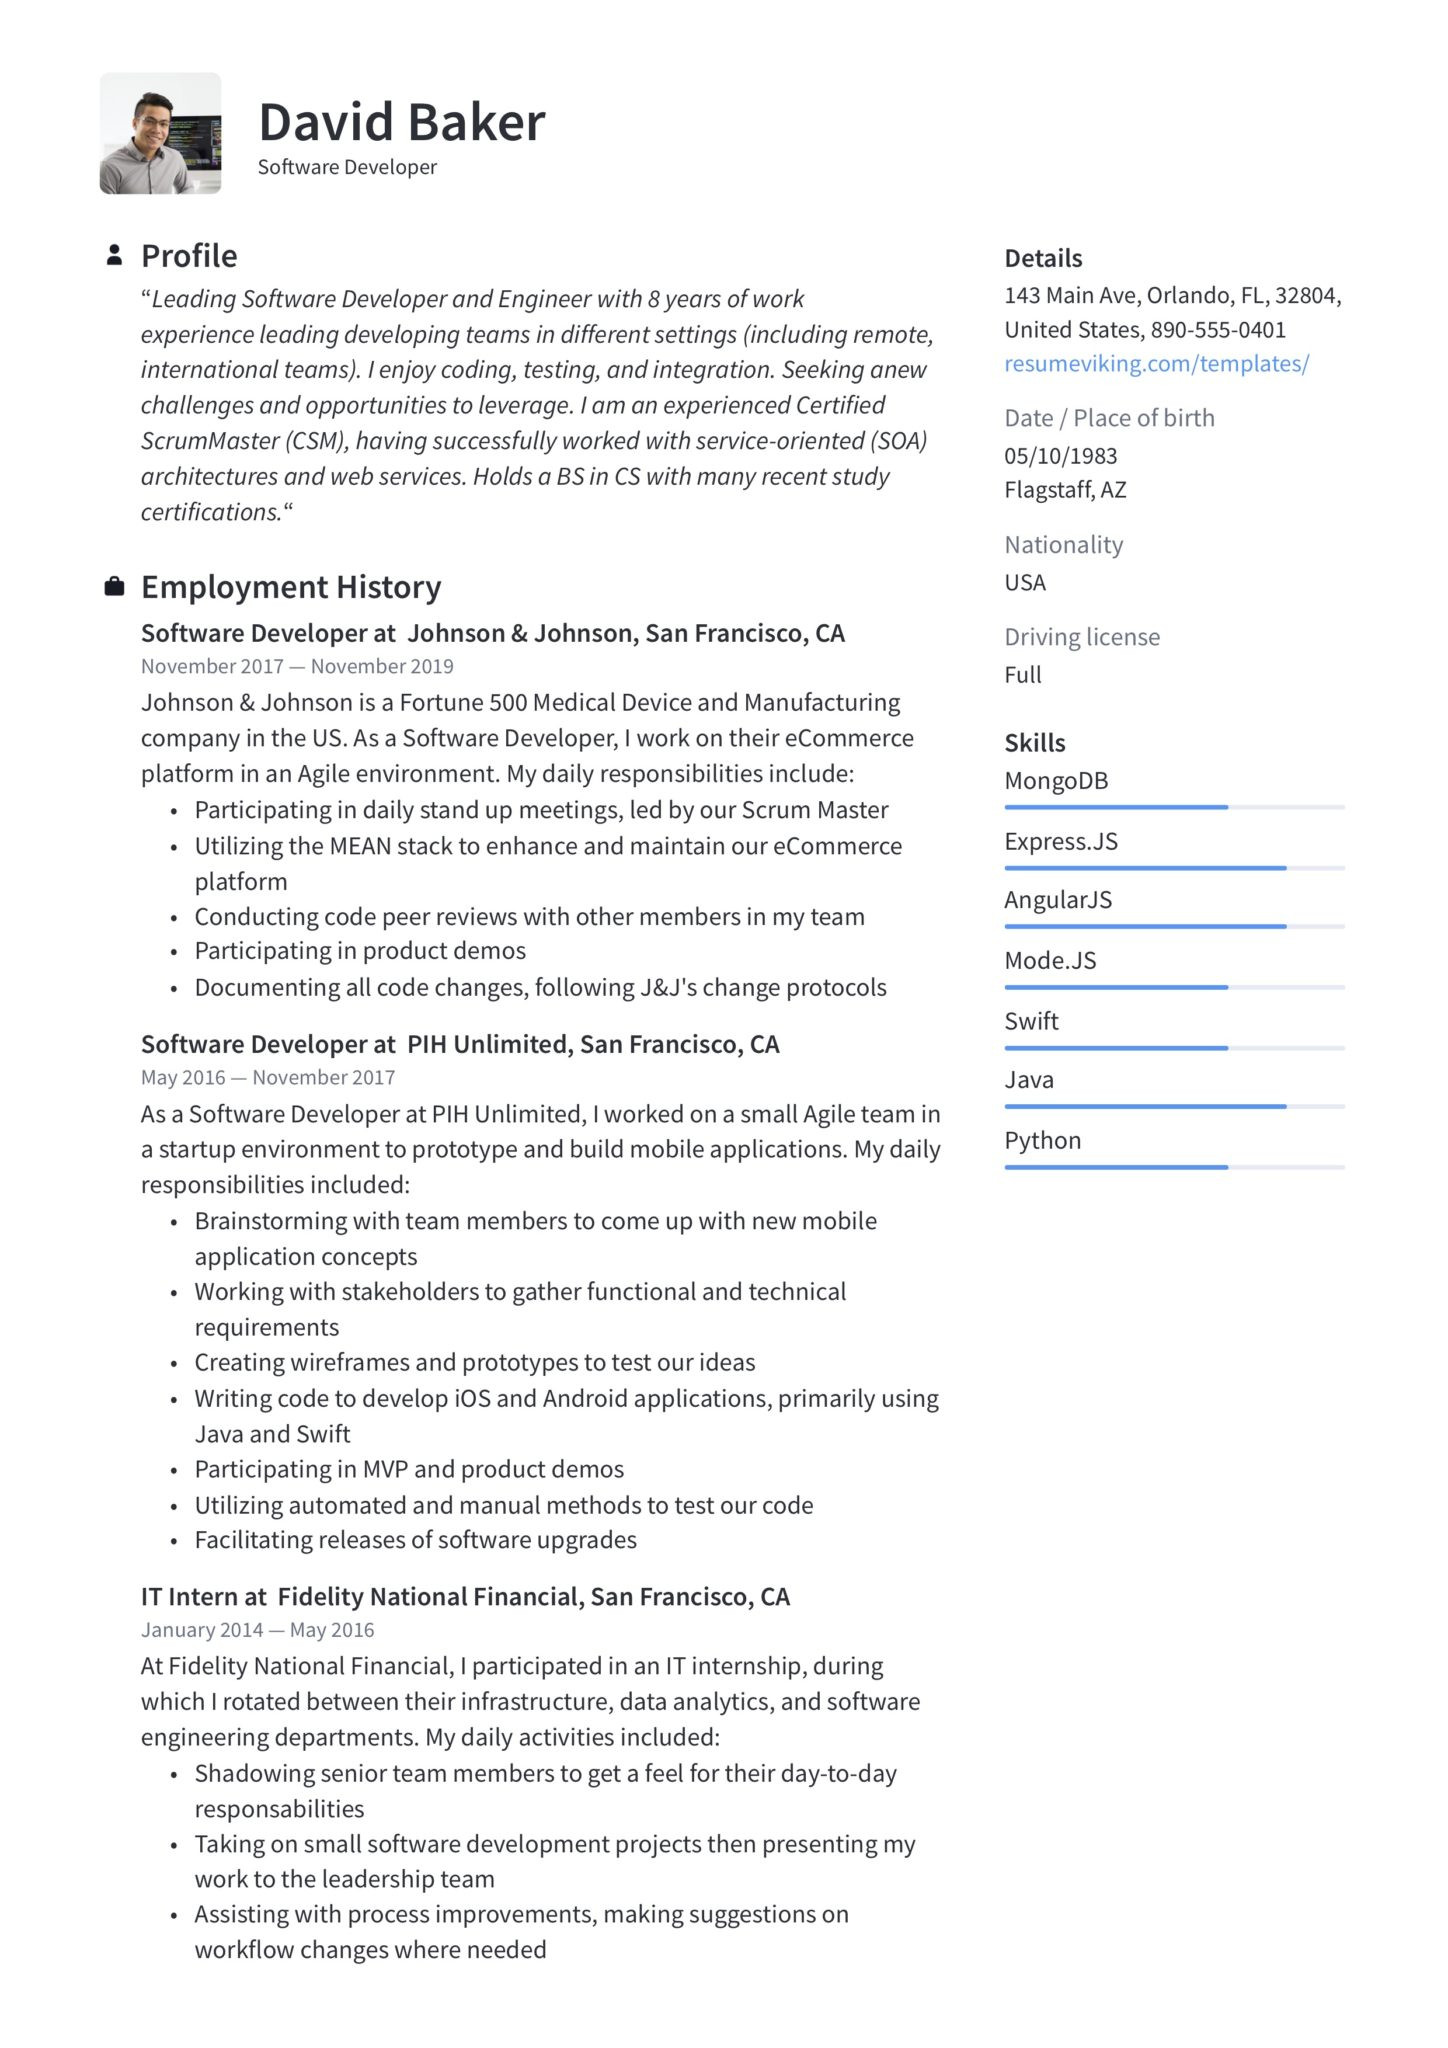 Microsoft Azure Sample Resumes for 0 2 Years Experience Guide: software Developer Resume  19 Examples Word & Pdf 2020